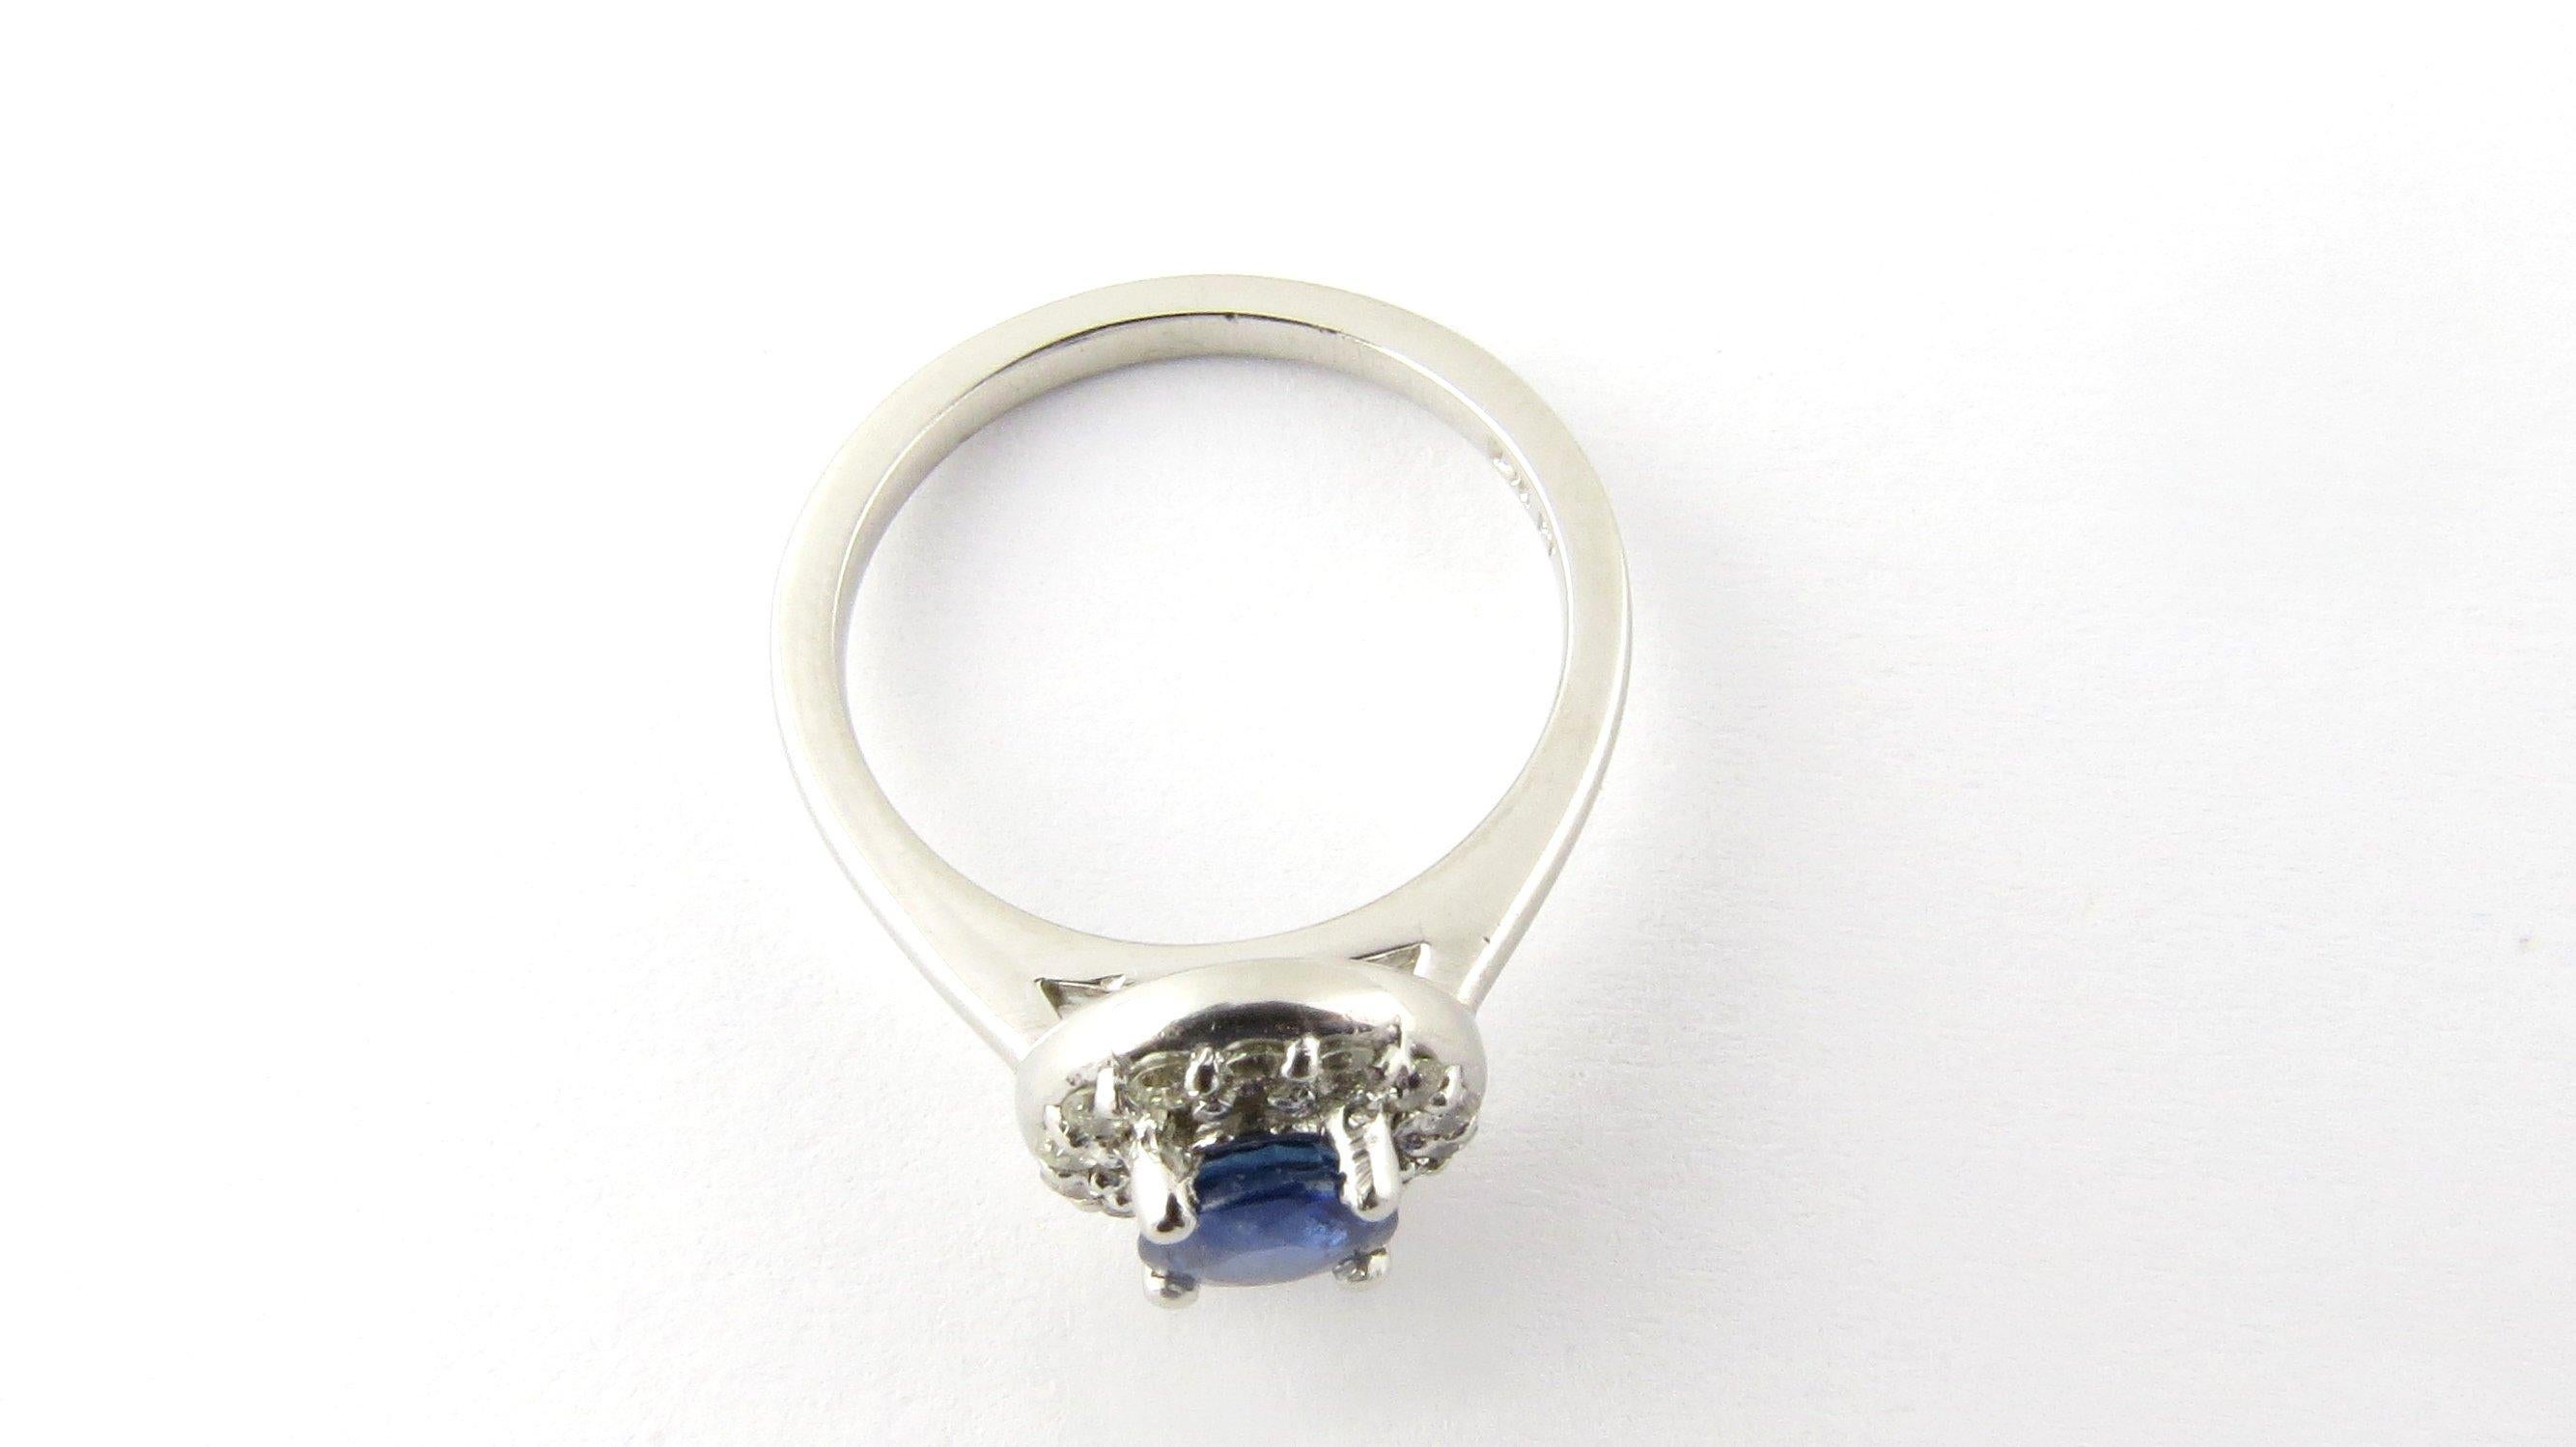 Vintage Platinum Natural Blue Sapphire and Diamond Ring 4.5-

This sparkling ring features one natural blue round sapphire (5 mm) surrounded by 14 round brilliant cut diamonds set in classic platinum.  Top of ring measures 9 mm.  Shank measures 1.5